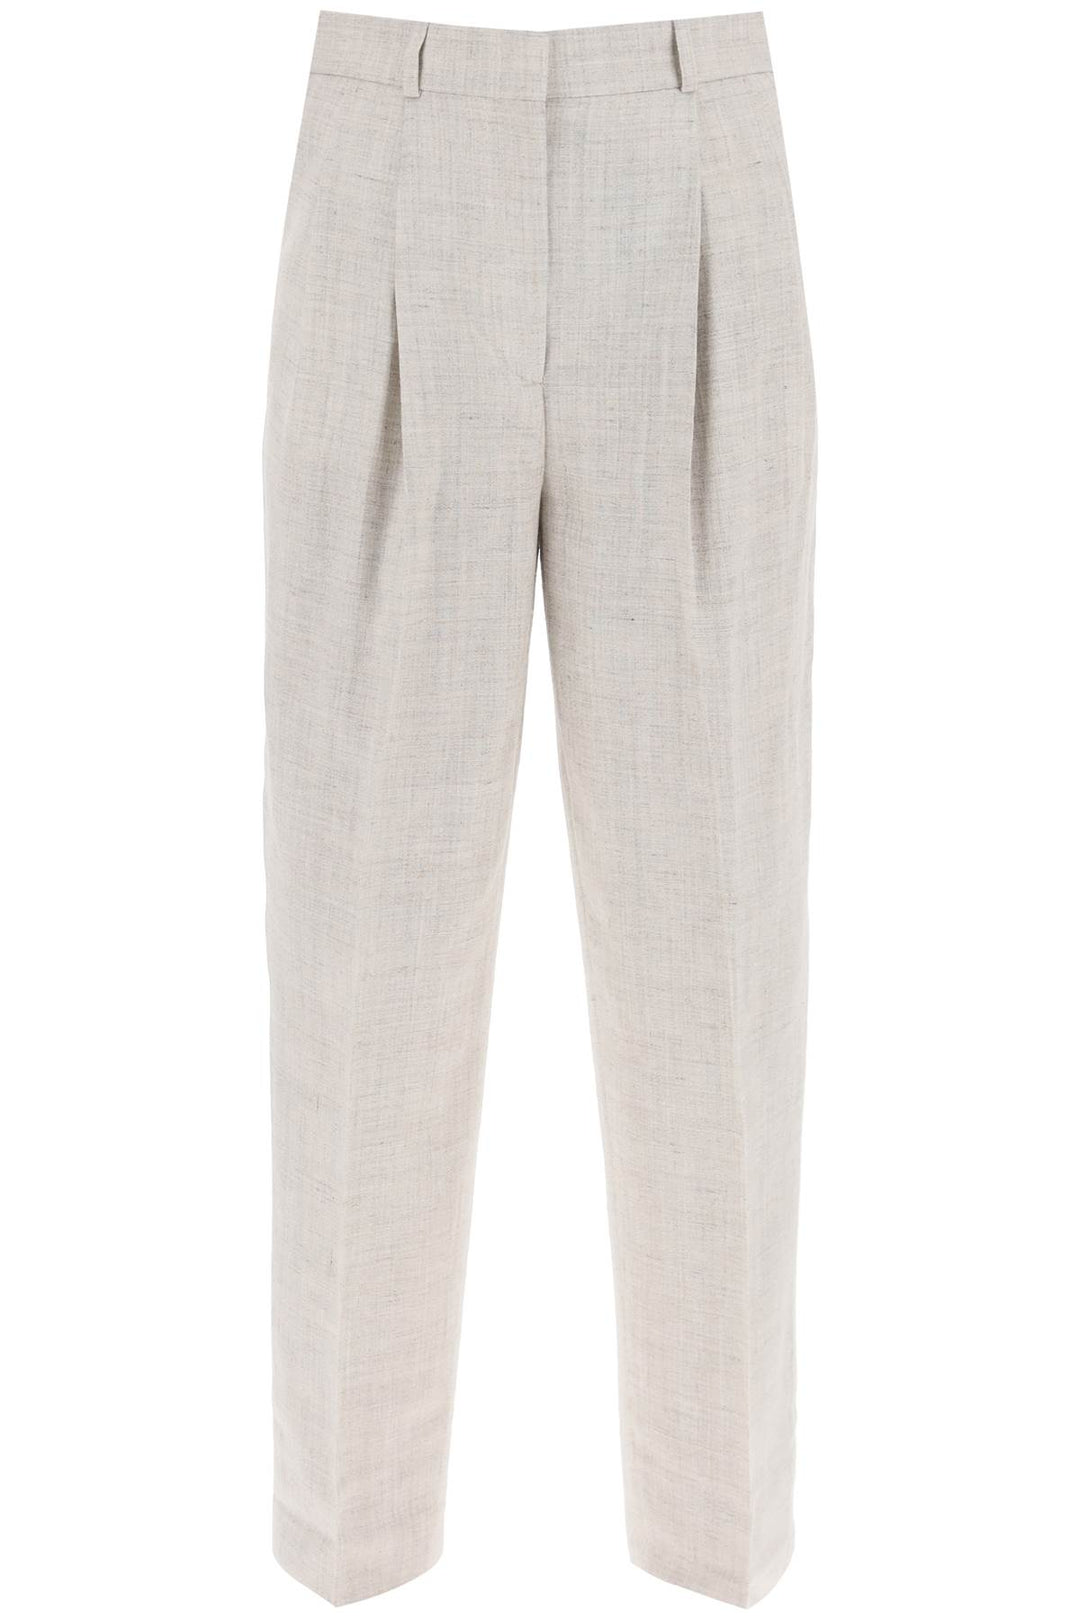 Toteme Tailored Trousers With Double Pleat   Grigio